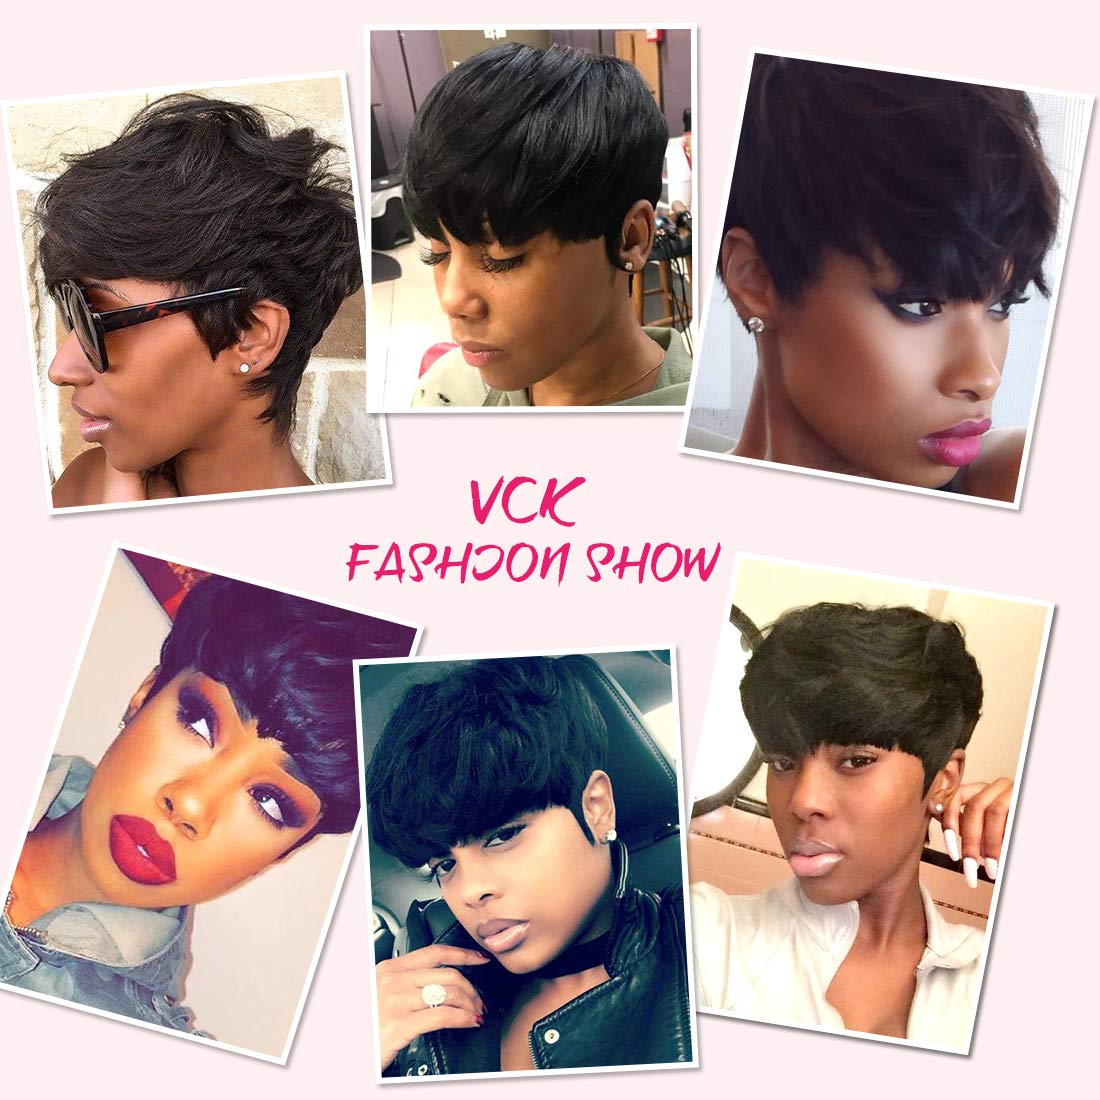 Women Black Wigs Short Hairpieces Toupee and Oblique Bangs Synthetic Wigs for Daily Party Wigs